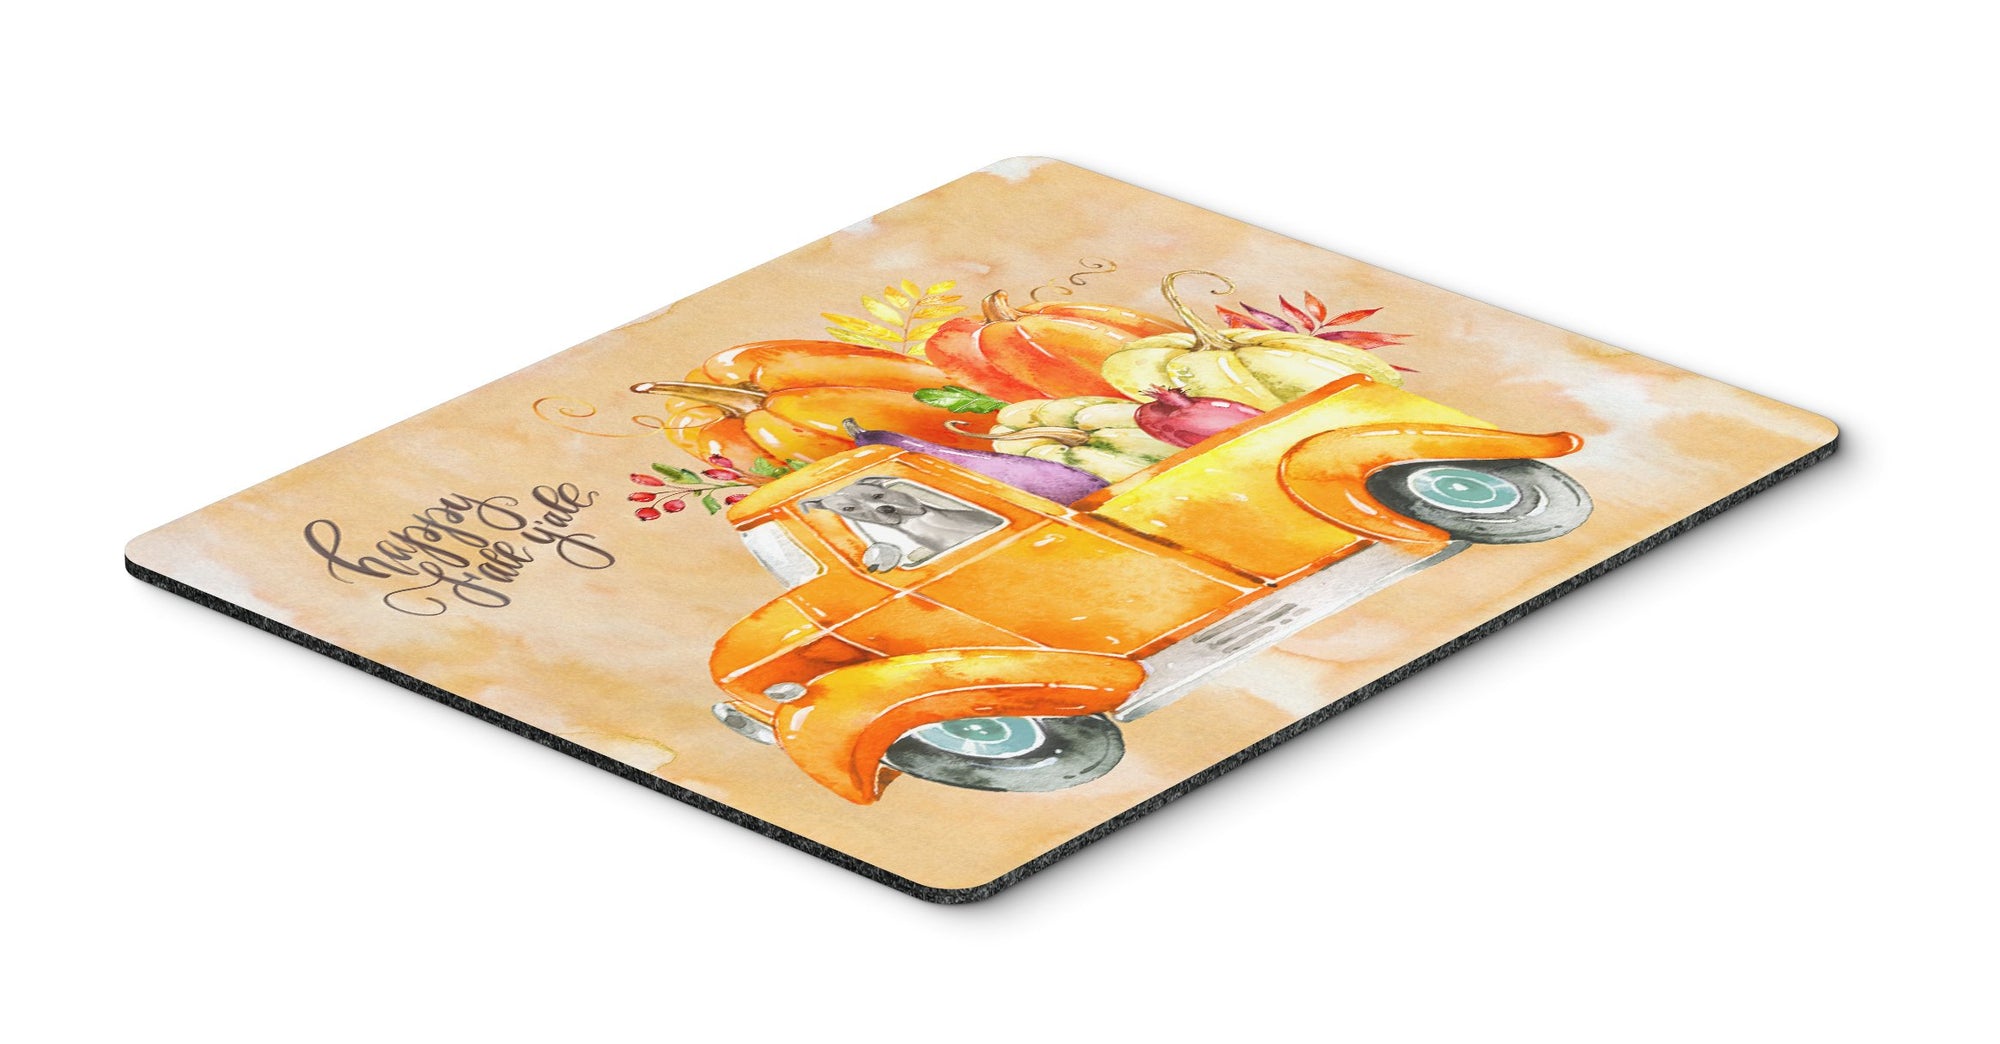 Fall Harvest Staffordshire Bull Terrier Mouse Pad, Hot Pad or Trivet CK2644MP by Caroline's Treasures